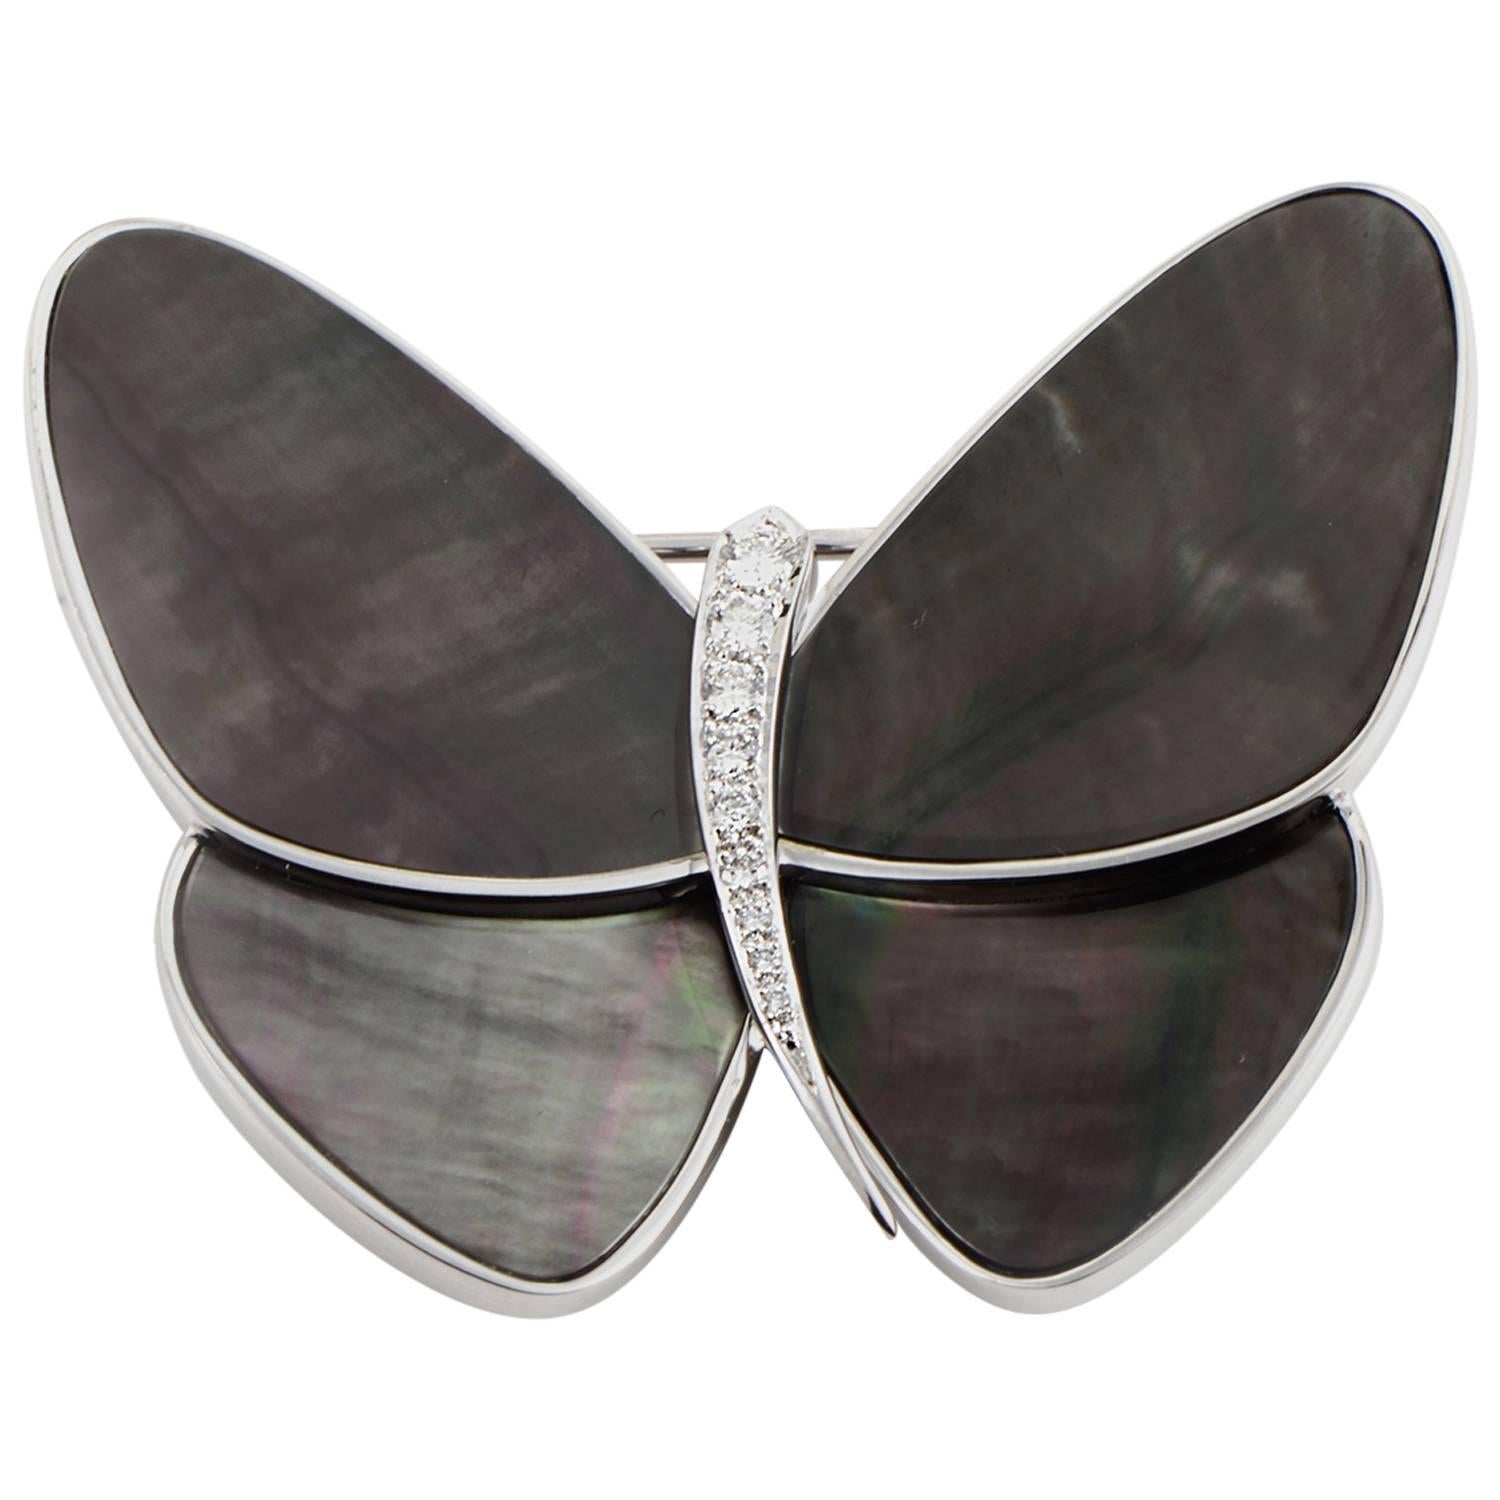 Van Cleef & Arpels mother of pearl diamond gold papillon butterfly Brooch